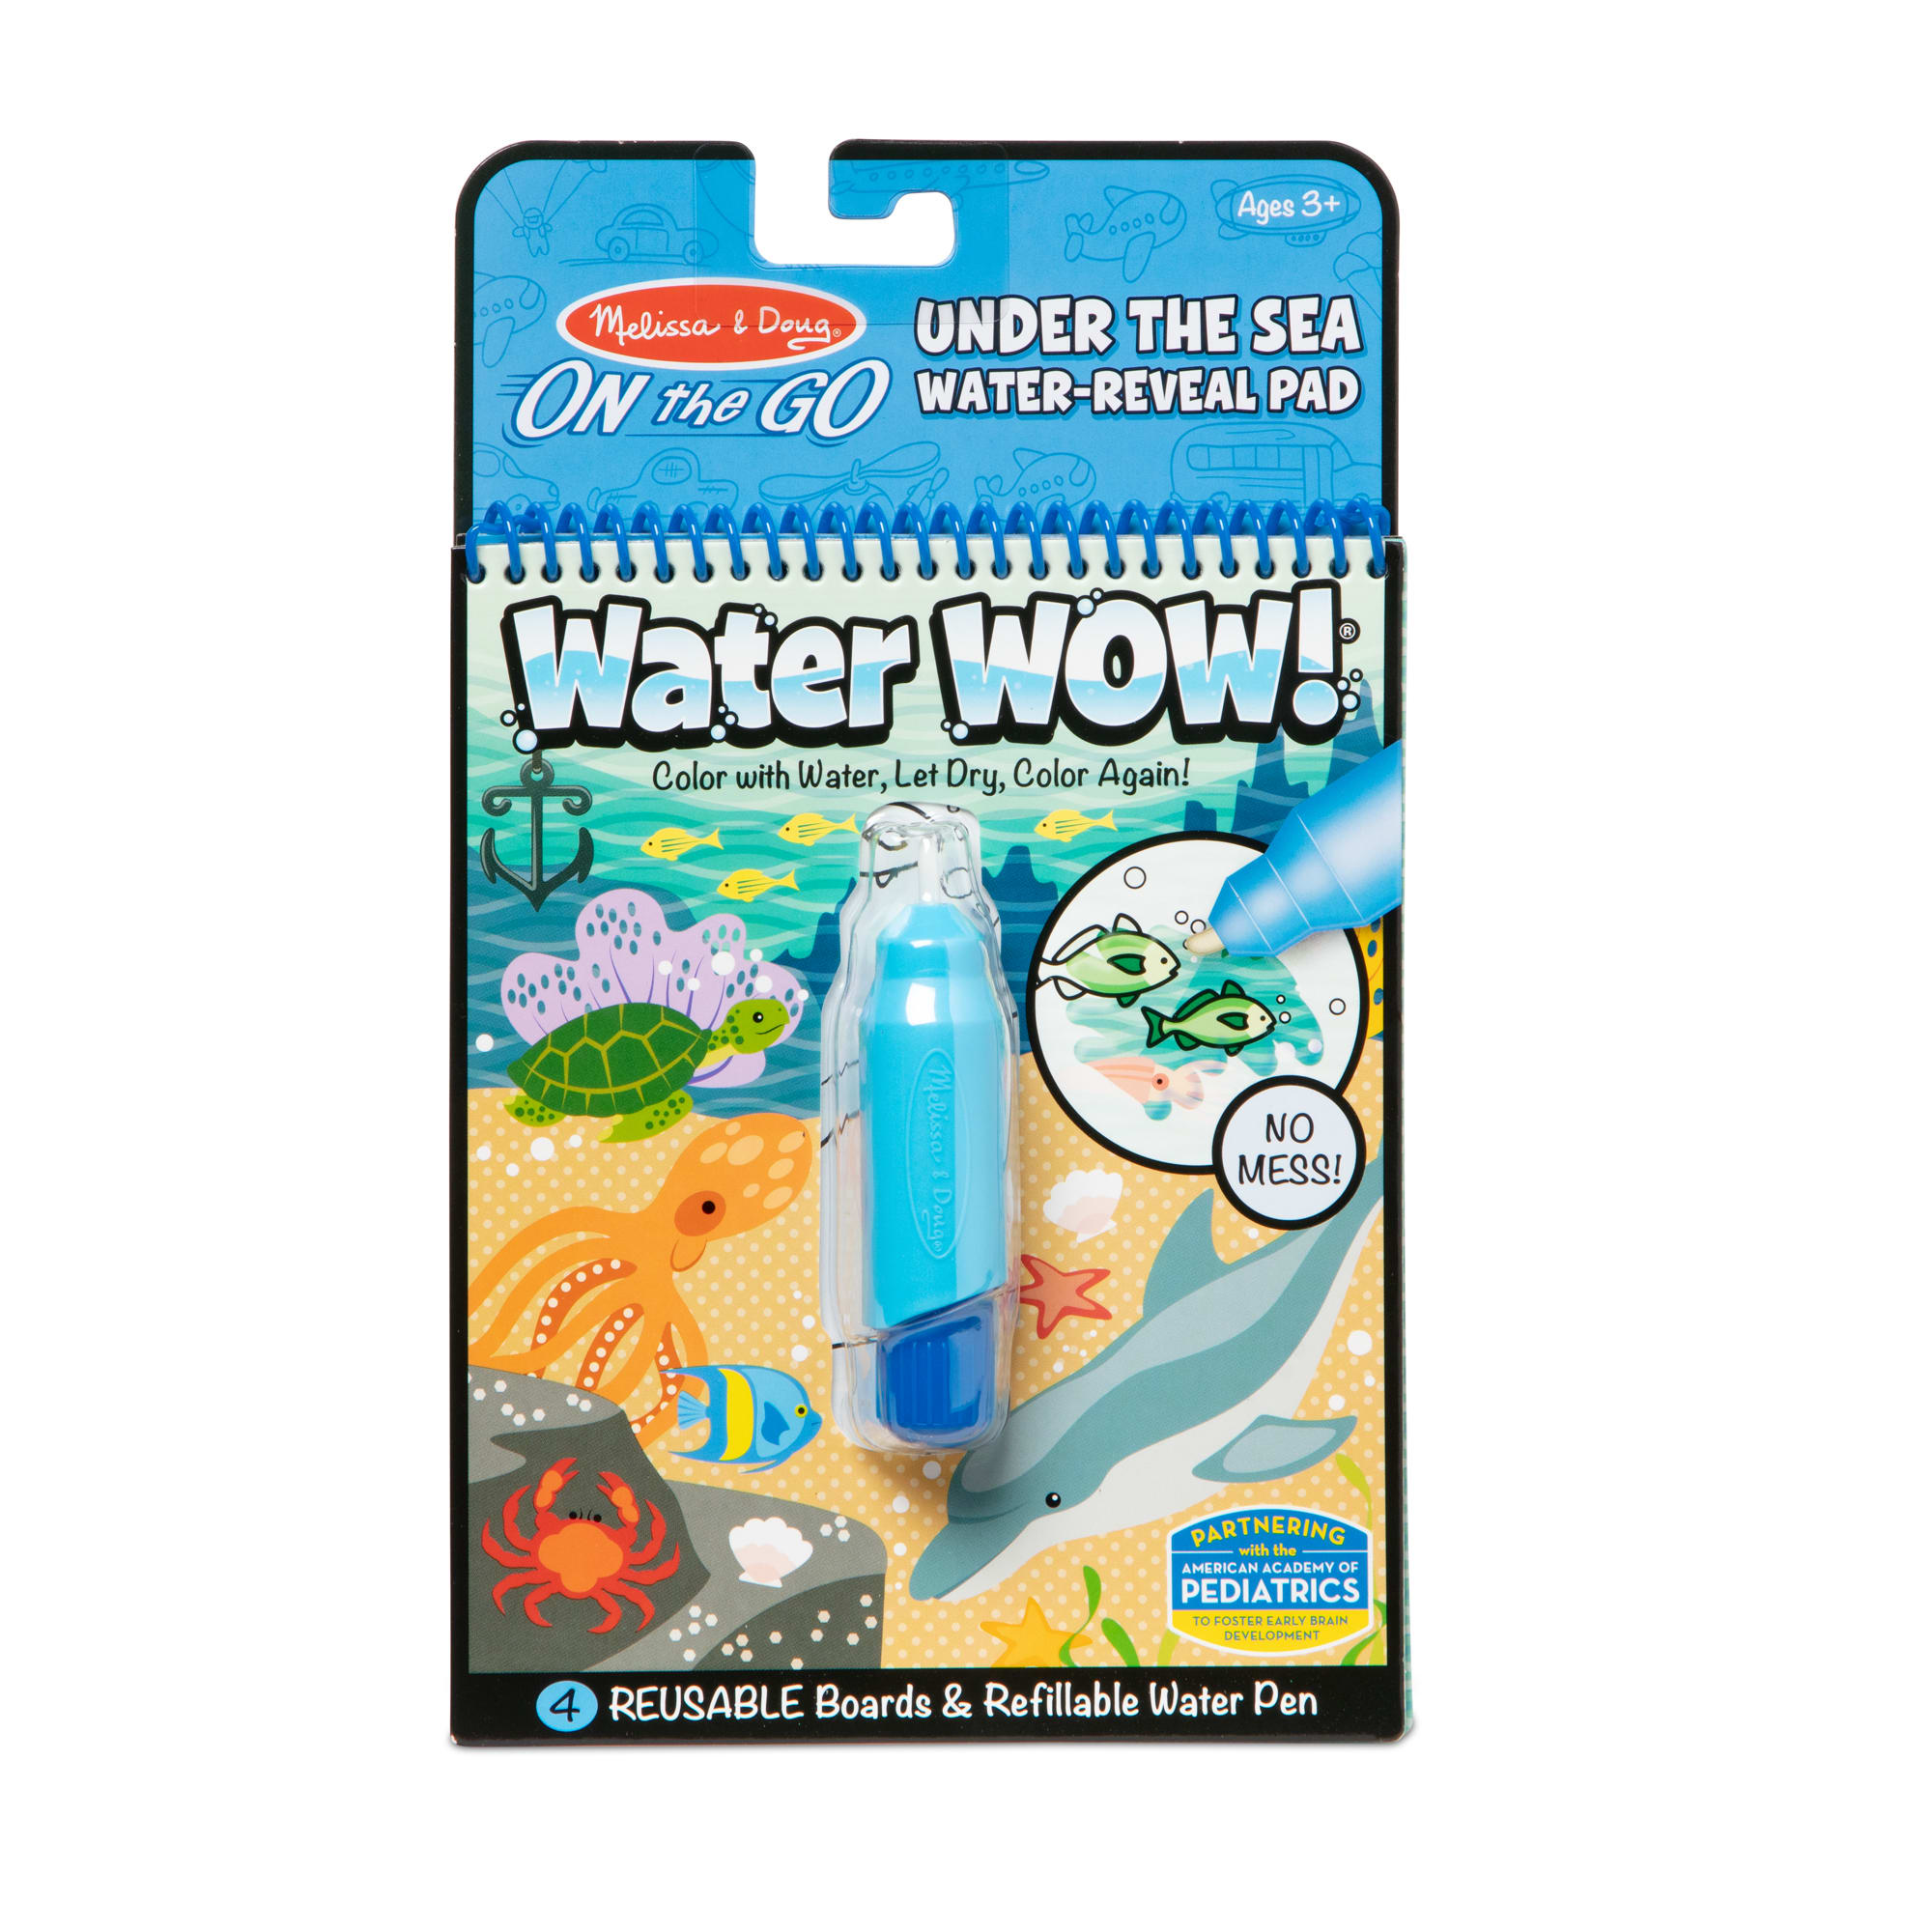 Melissa & Doug Water Wow! On The Go Water-Reveal Pad / Under the Sea